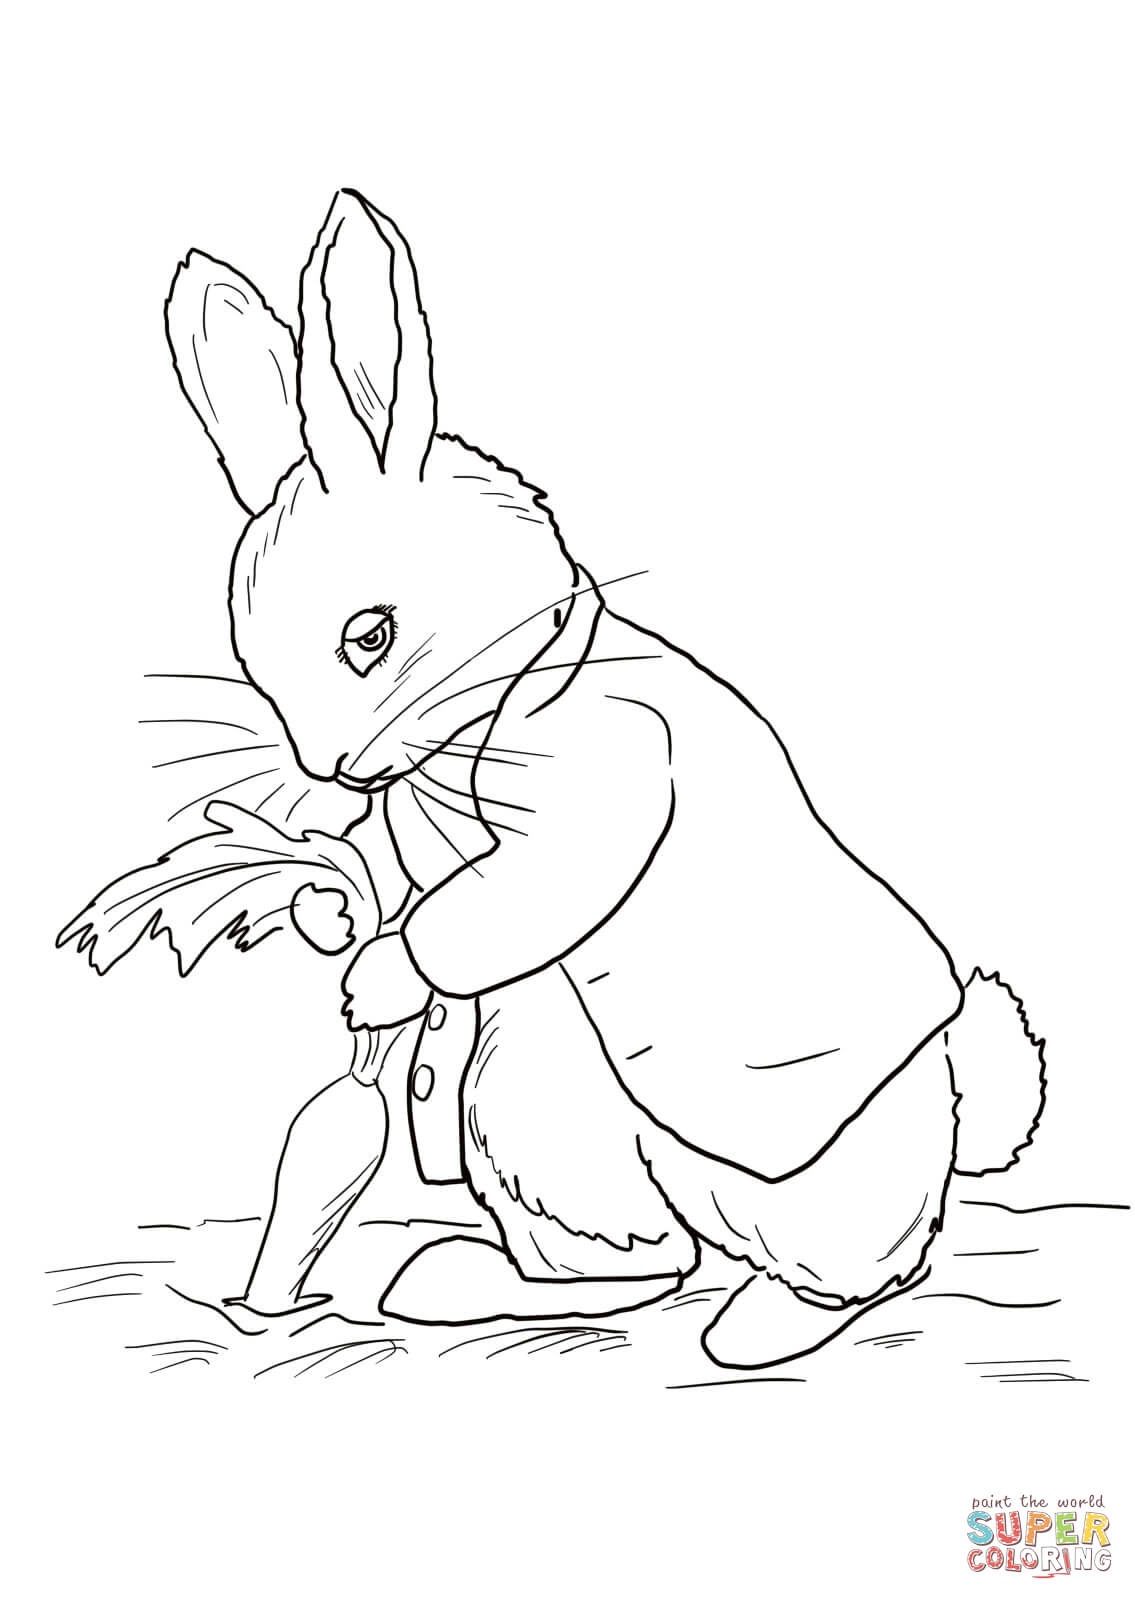 Coloring Ideas : Peter Rabbit Stealing Carrots Coloring Page Free - Free Printable Peter Rabbit Coloring Pages